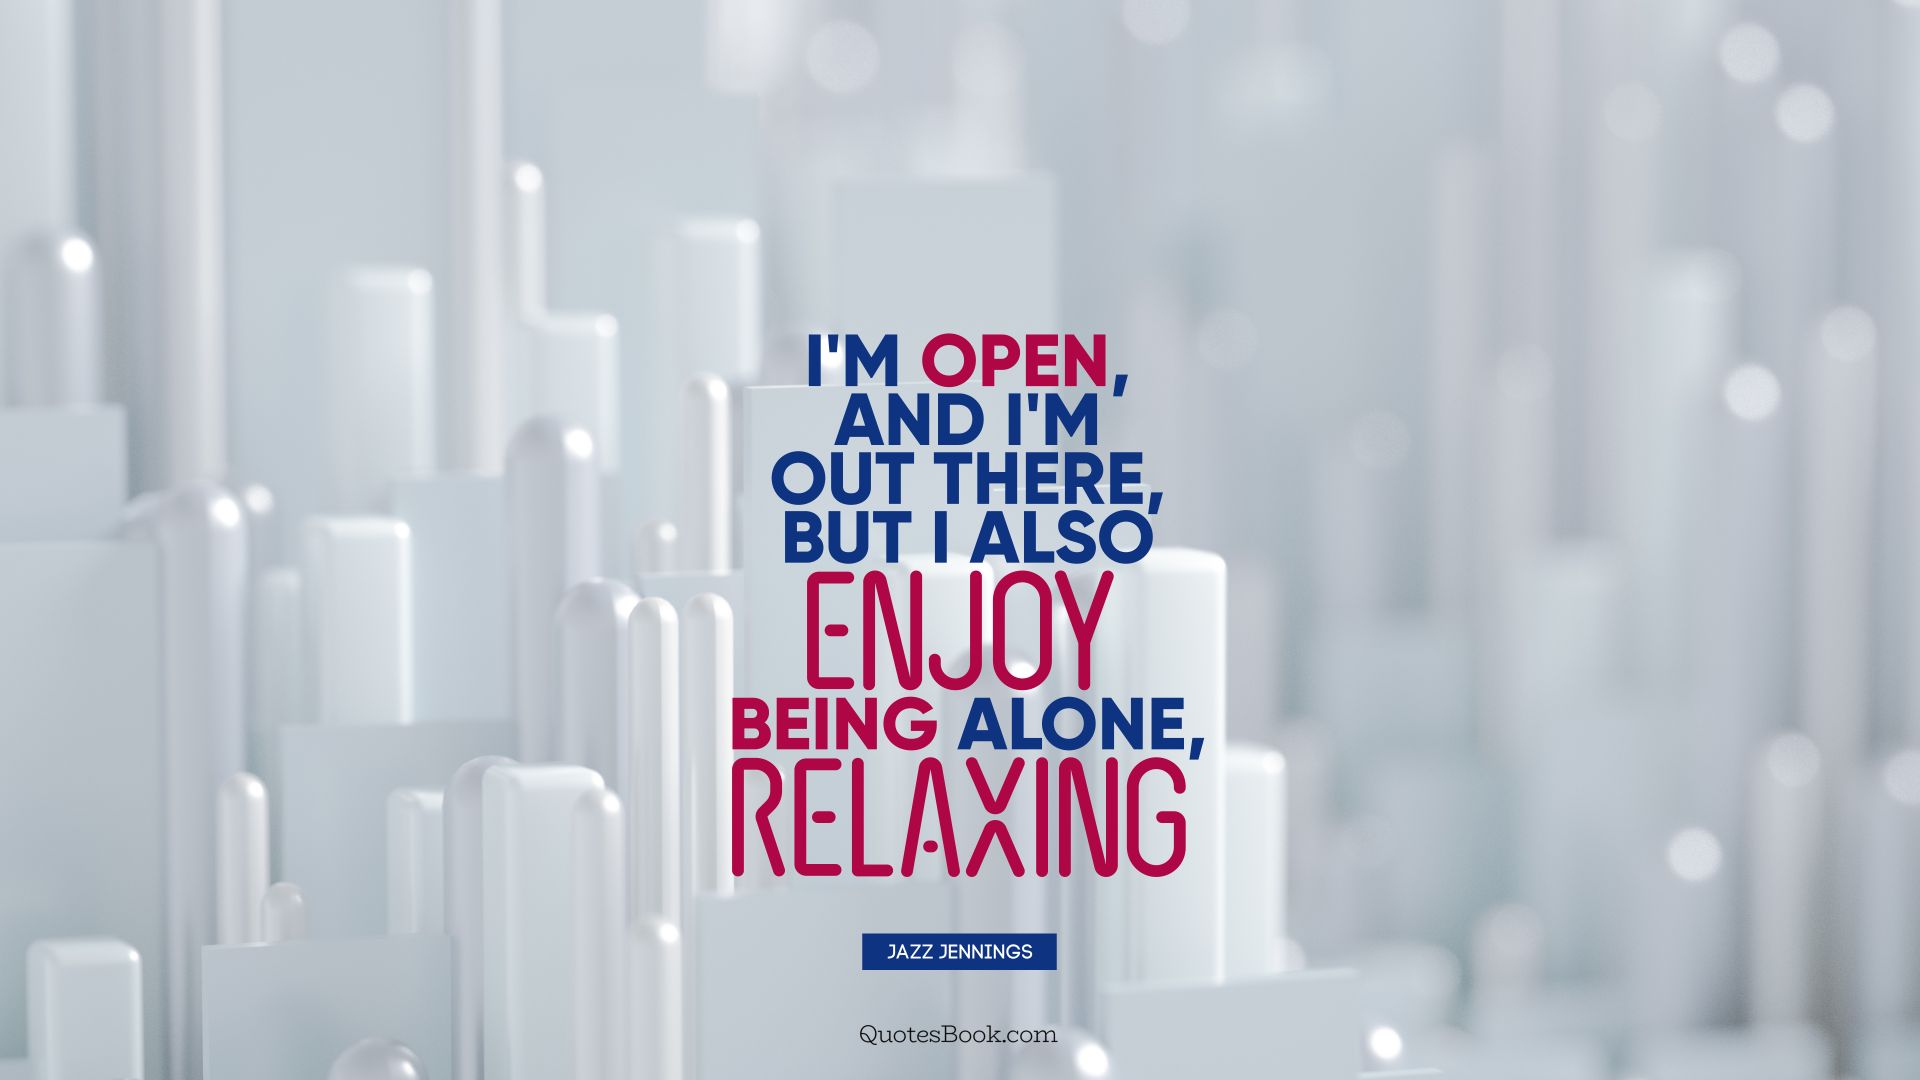 I'm open, and I'm out there, but I also enjoy being alone, relaxing. - Quote by Jazz Jennings